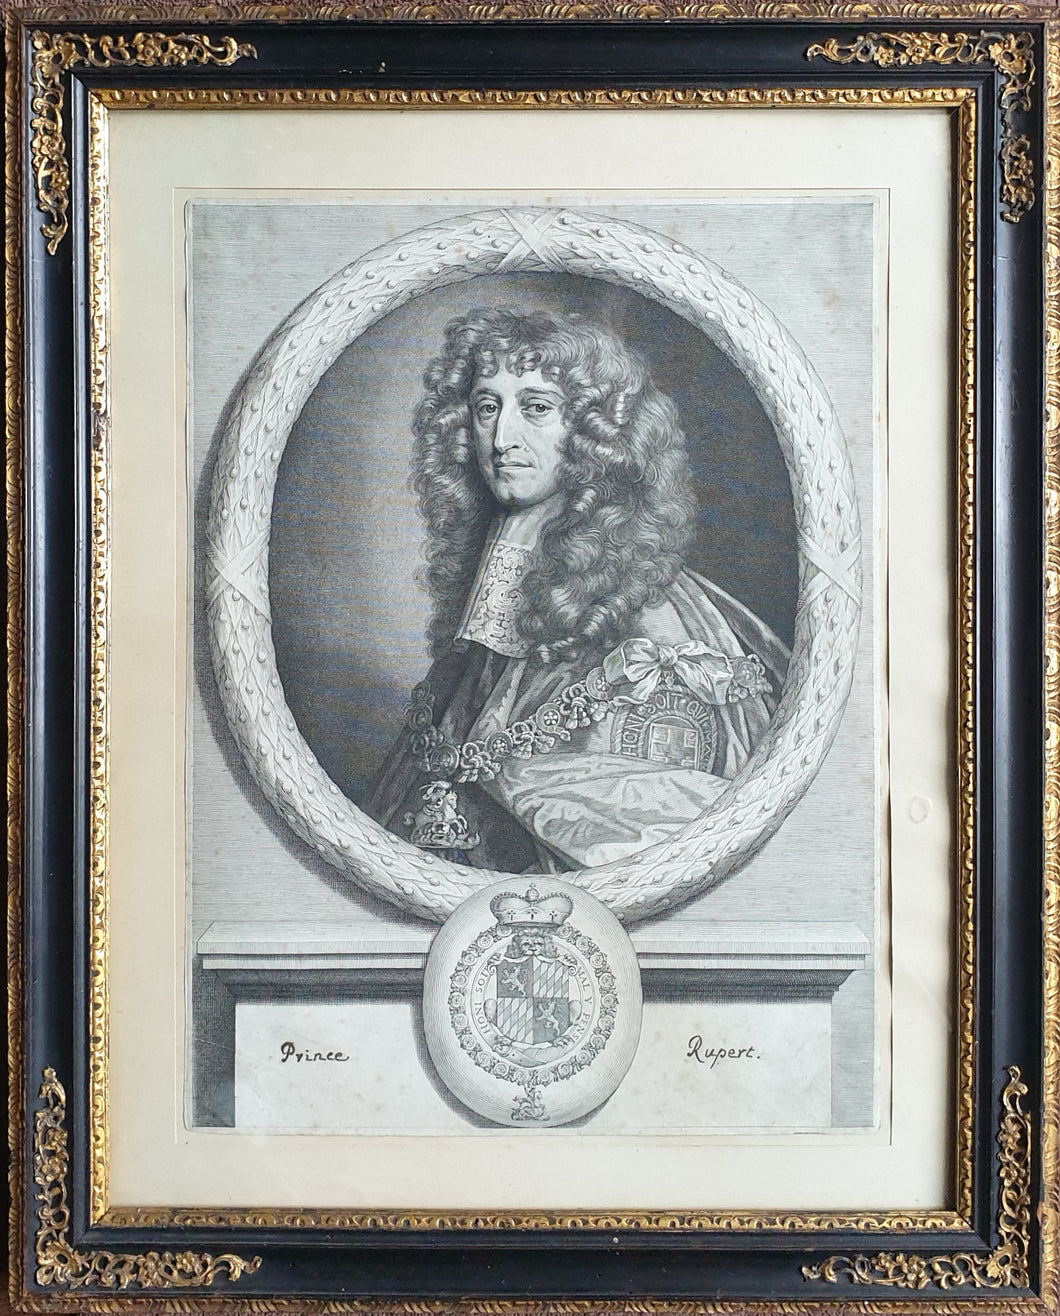 Prince Rupert Of The Rhine Abraham Blooteling Portrait Engraving After Sir Peter Lely Proof Impression Circa.1660